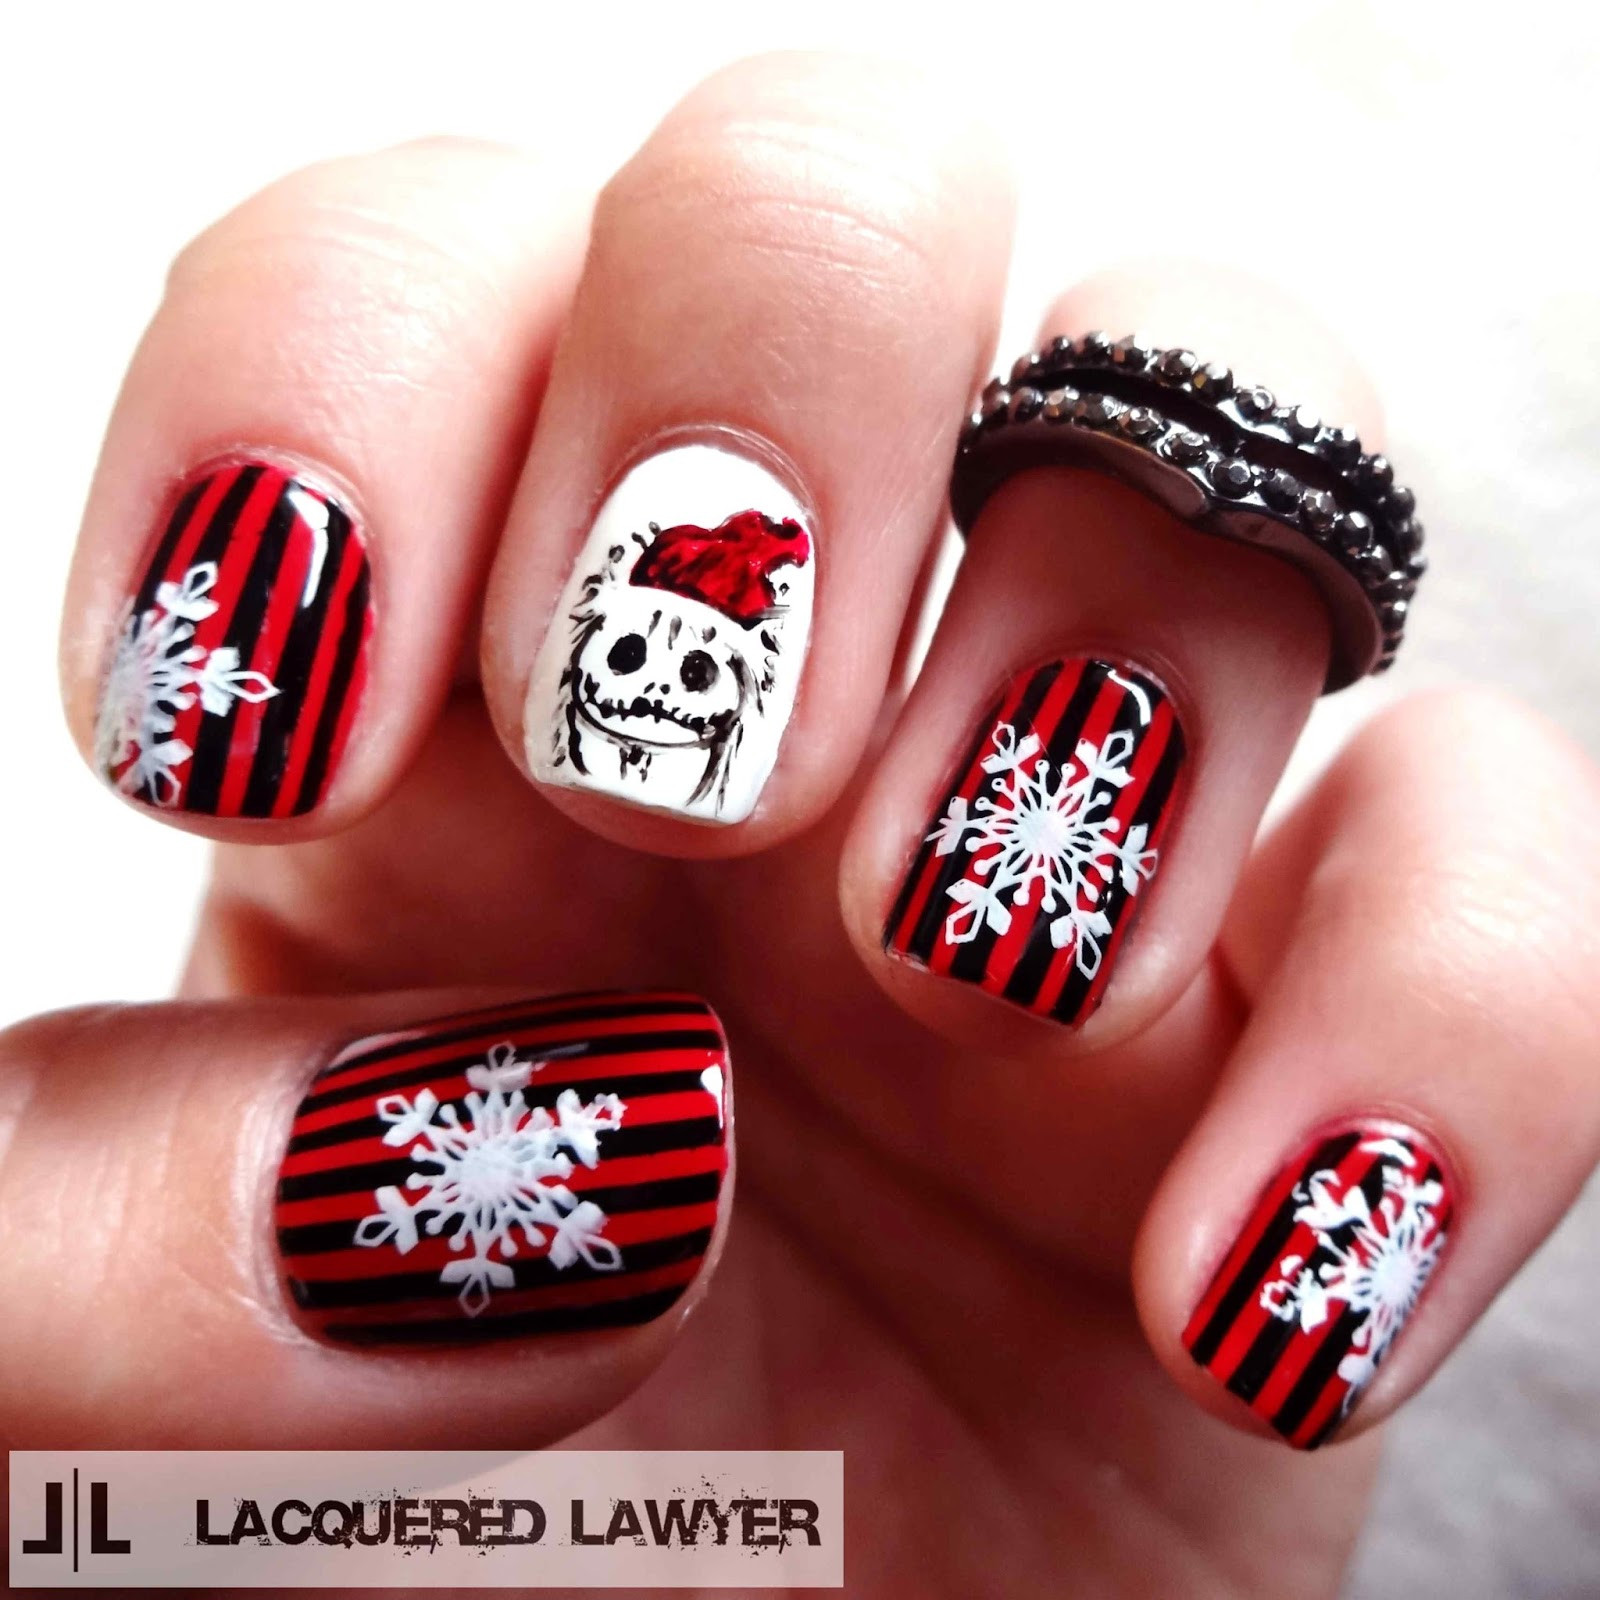 Nightmare Before Christmas Nail Designs
 Lacquered Lawyer